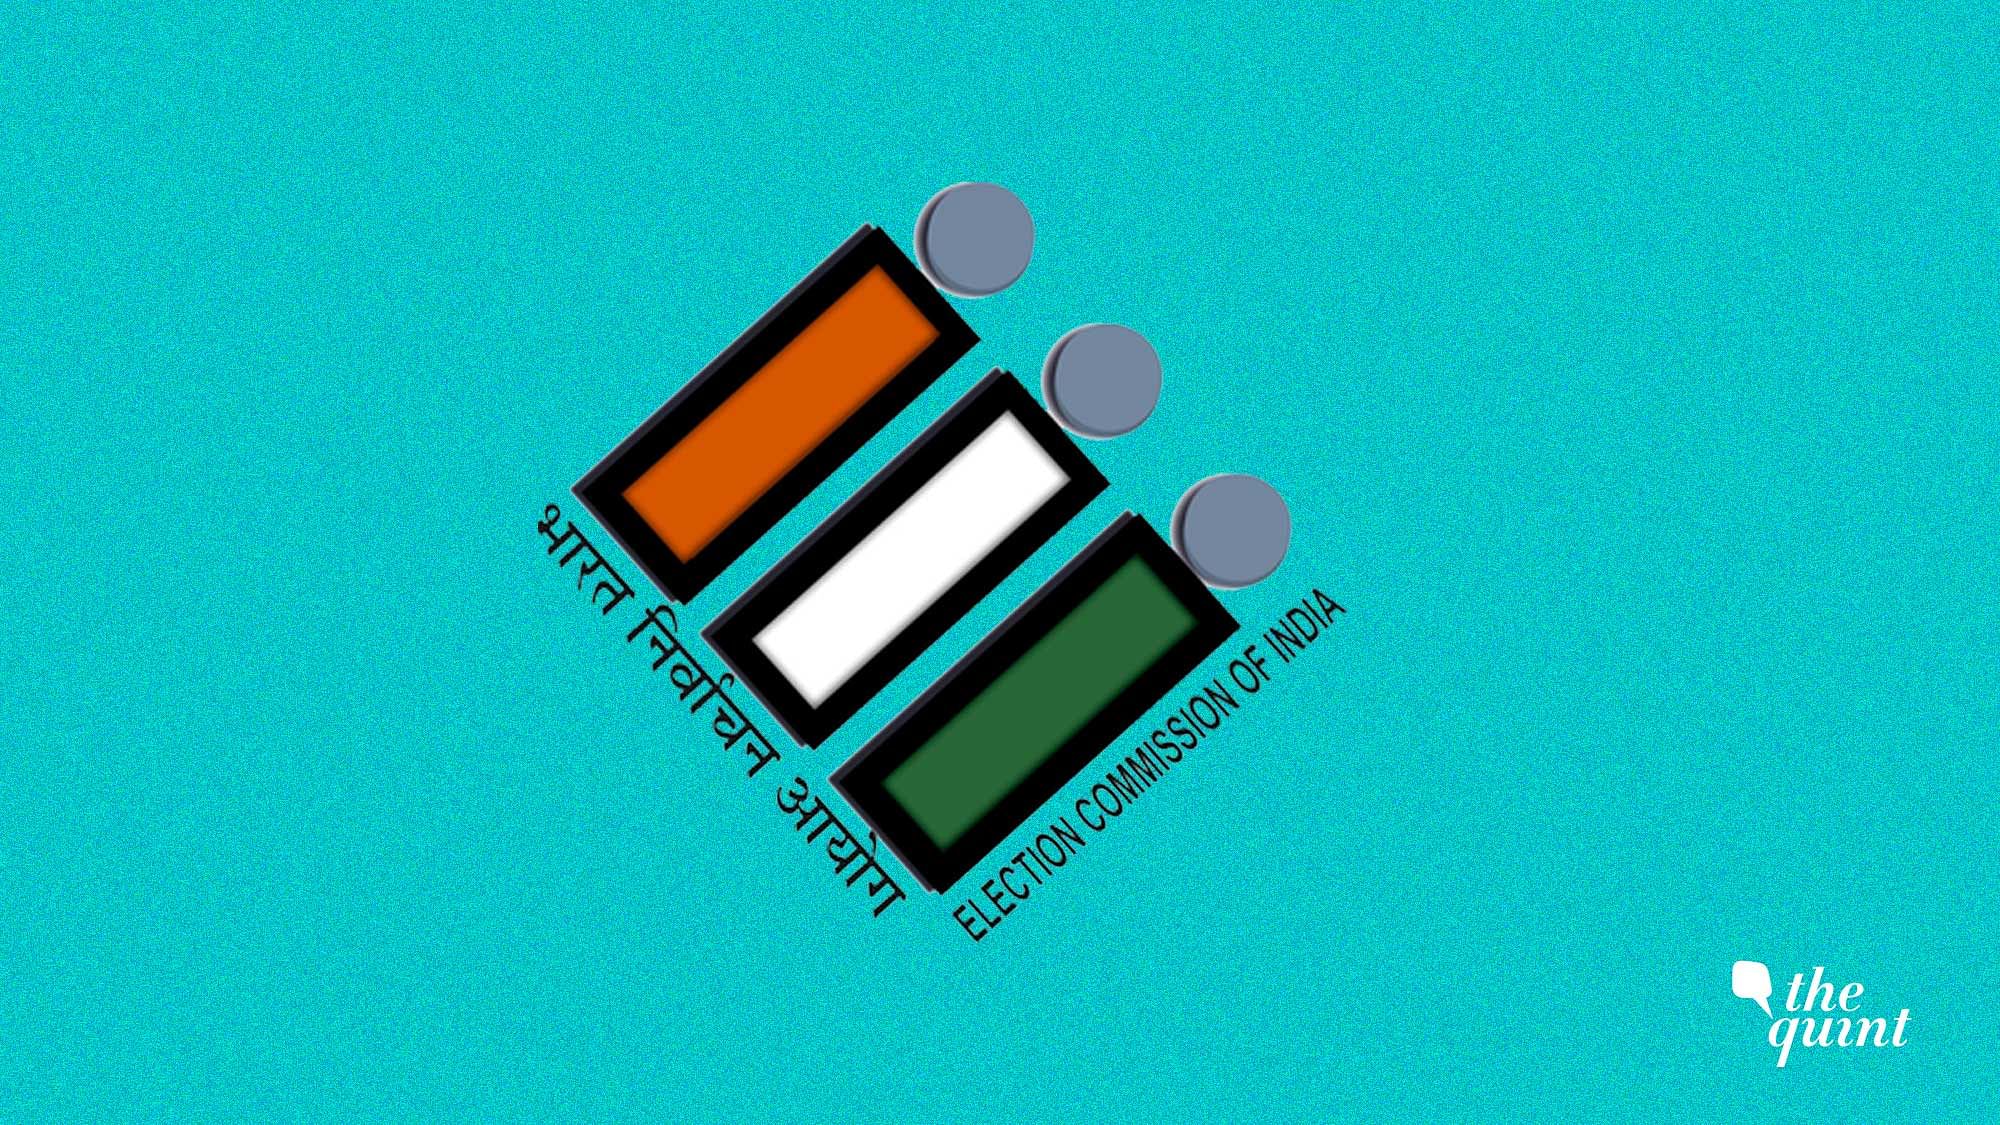 The Election Commission of India logo.